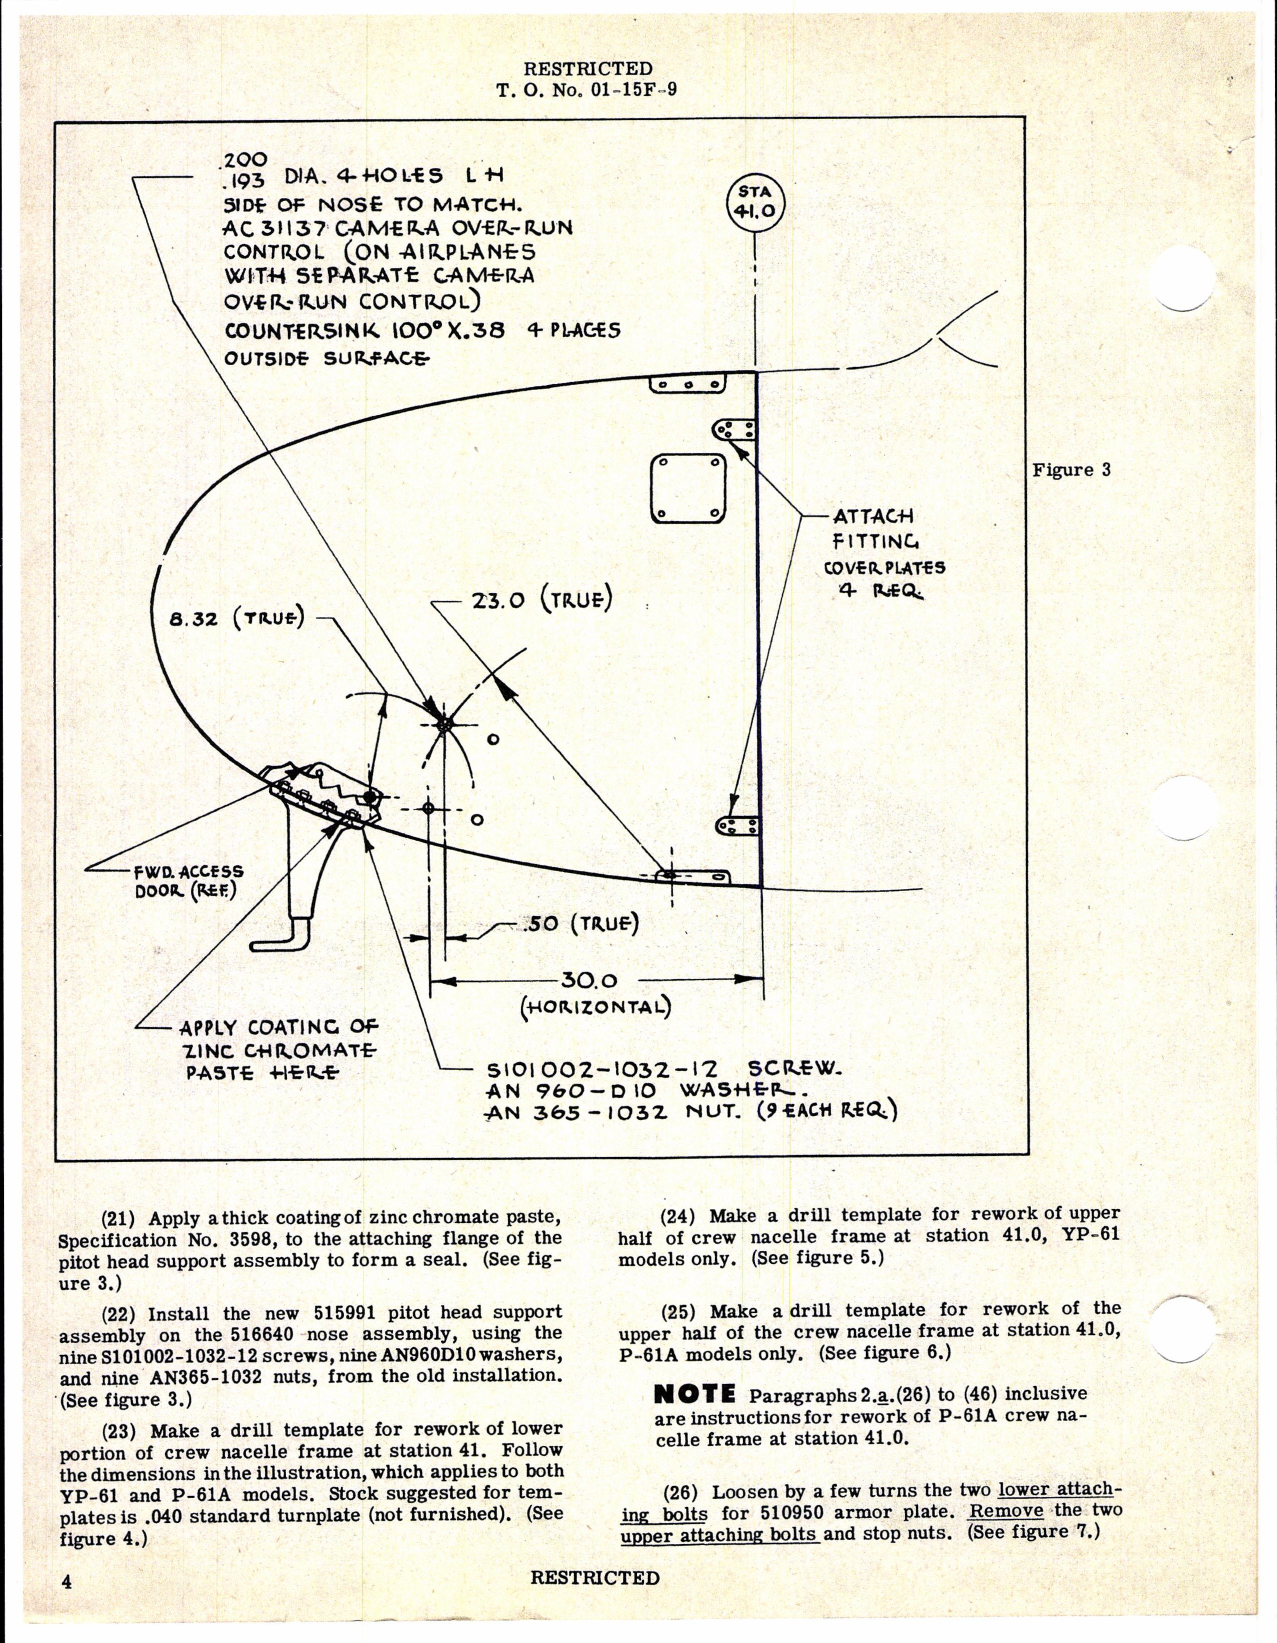 Sample page 4 from AirCorps Library document: Northrop - Installation of Fibre-Glass Cres Nacelle Nose for YP-61 and P-61A